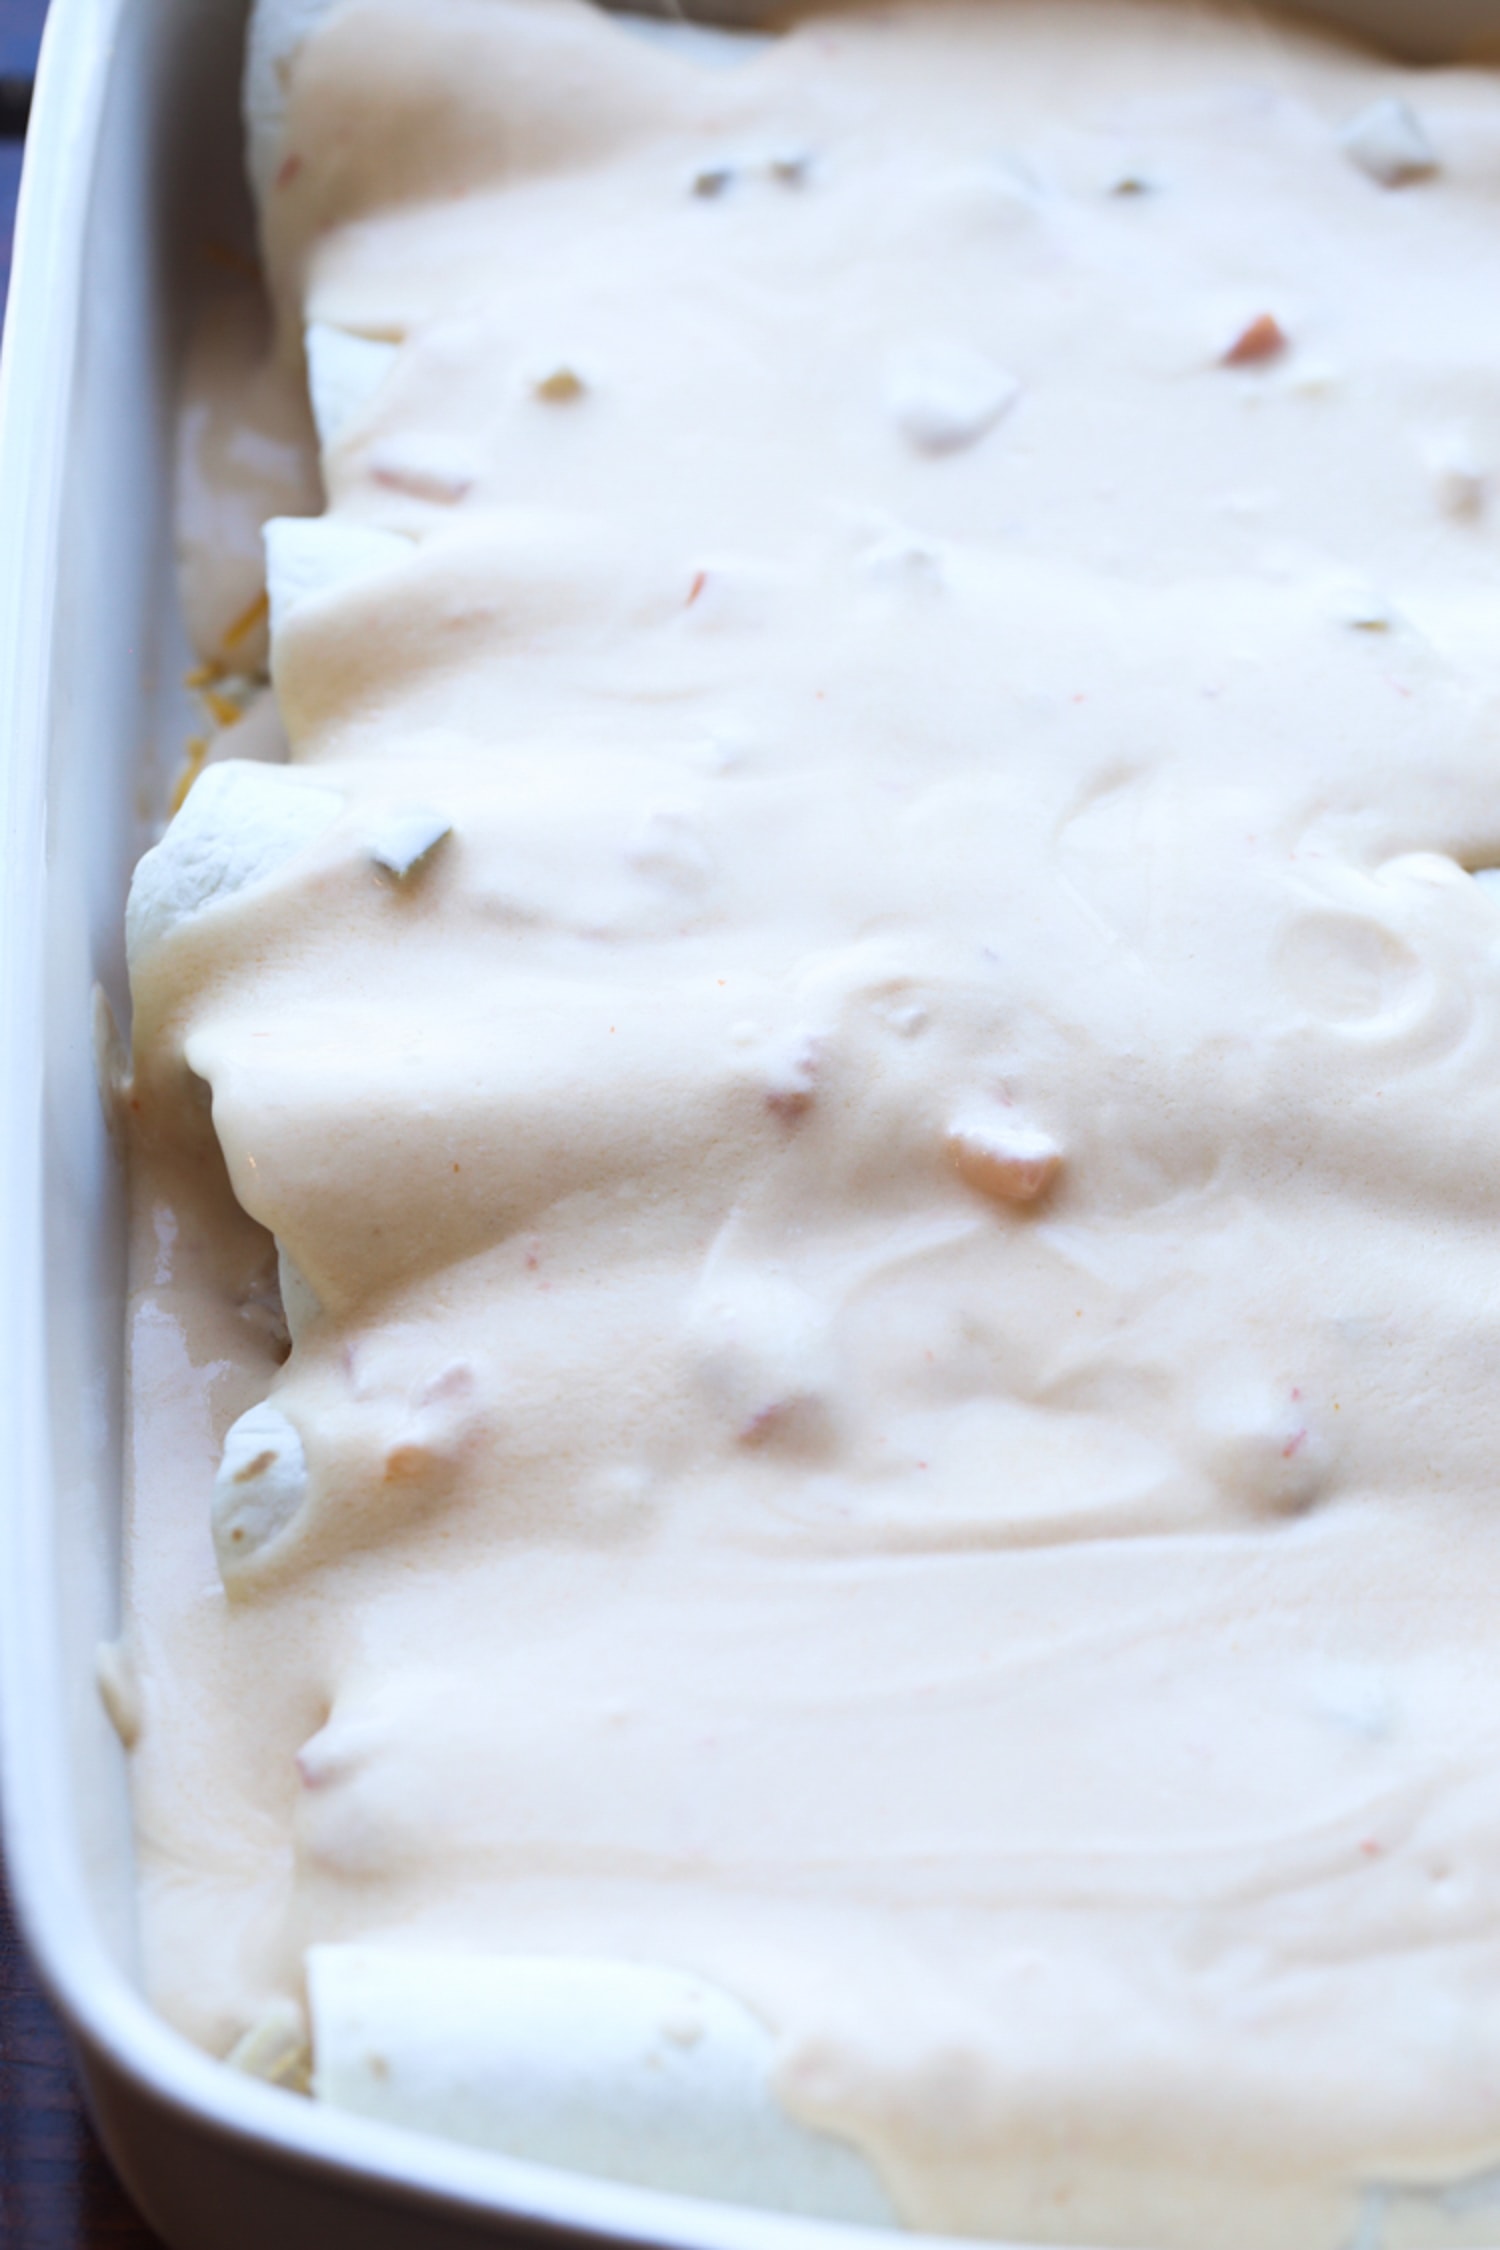 sour cream sauce on top of enchiladas in a casserole dish before going in the oven